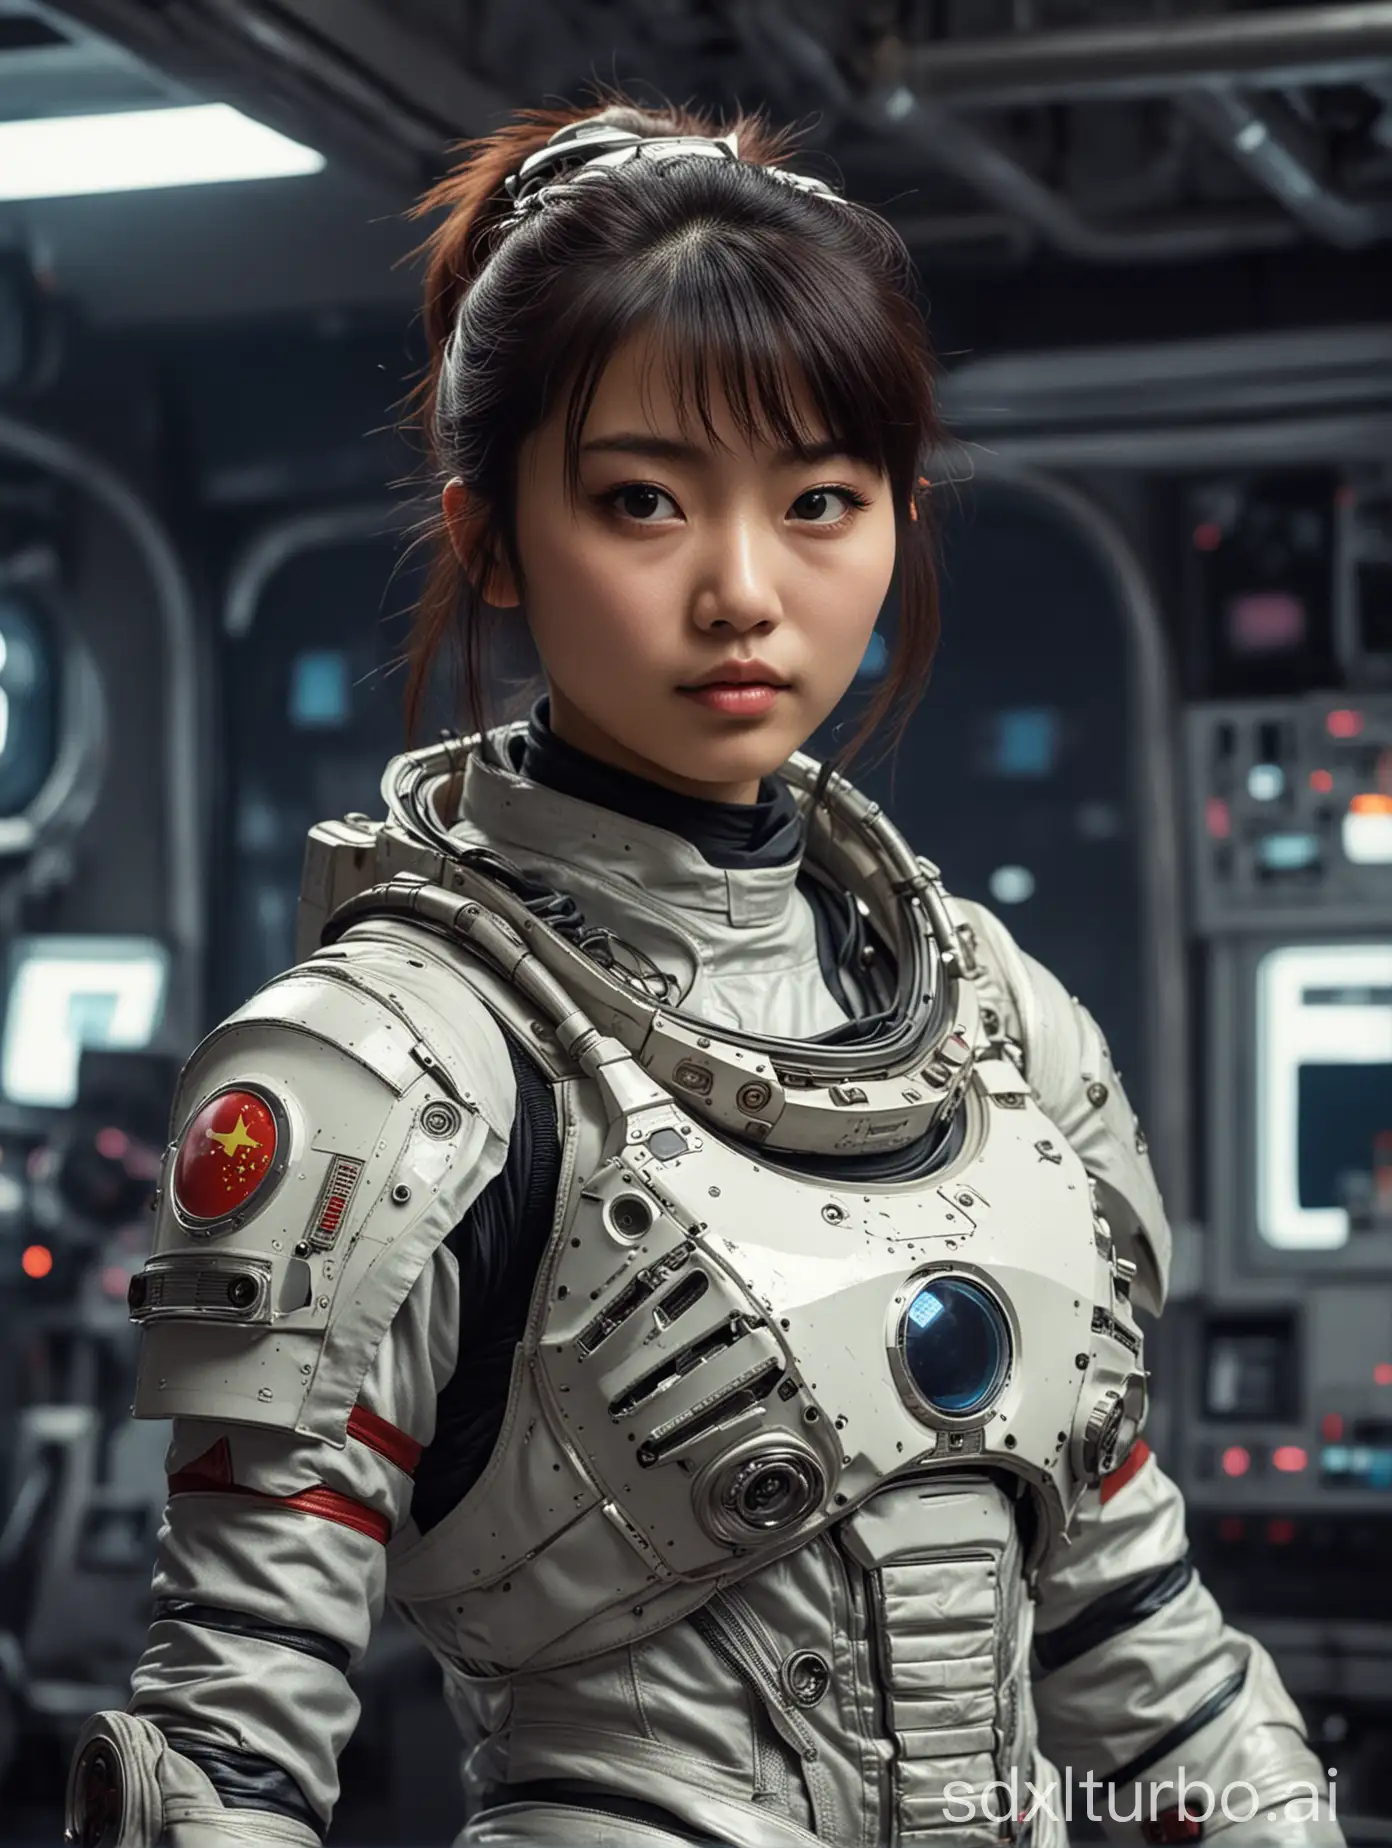 alternative future, 80s tech, space center, Chinese girl armored astronaut